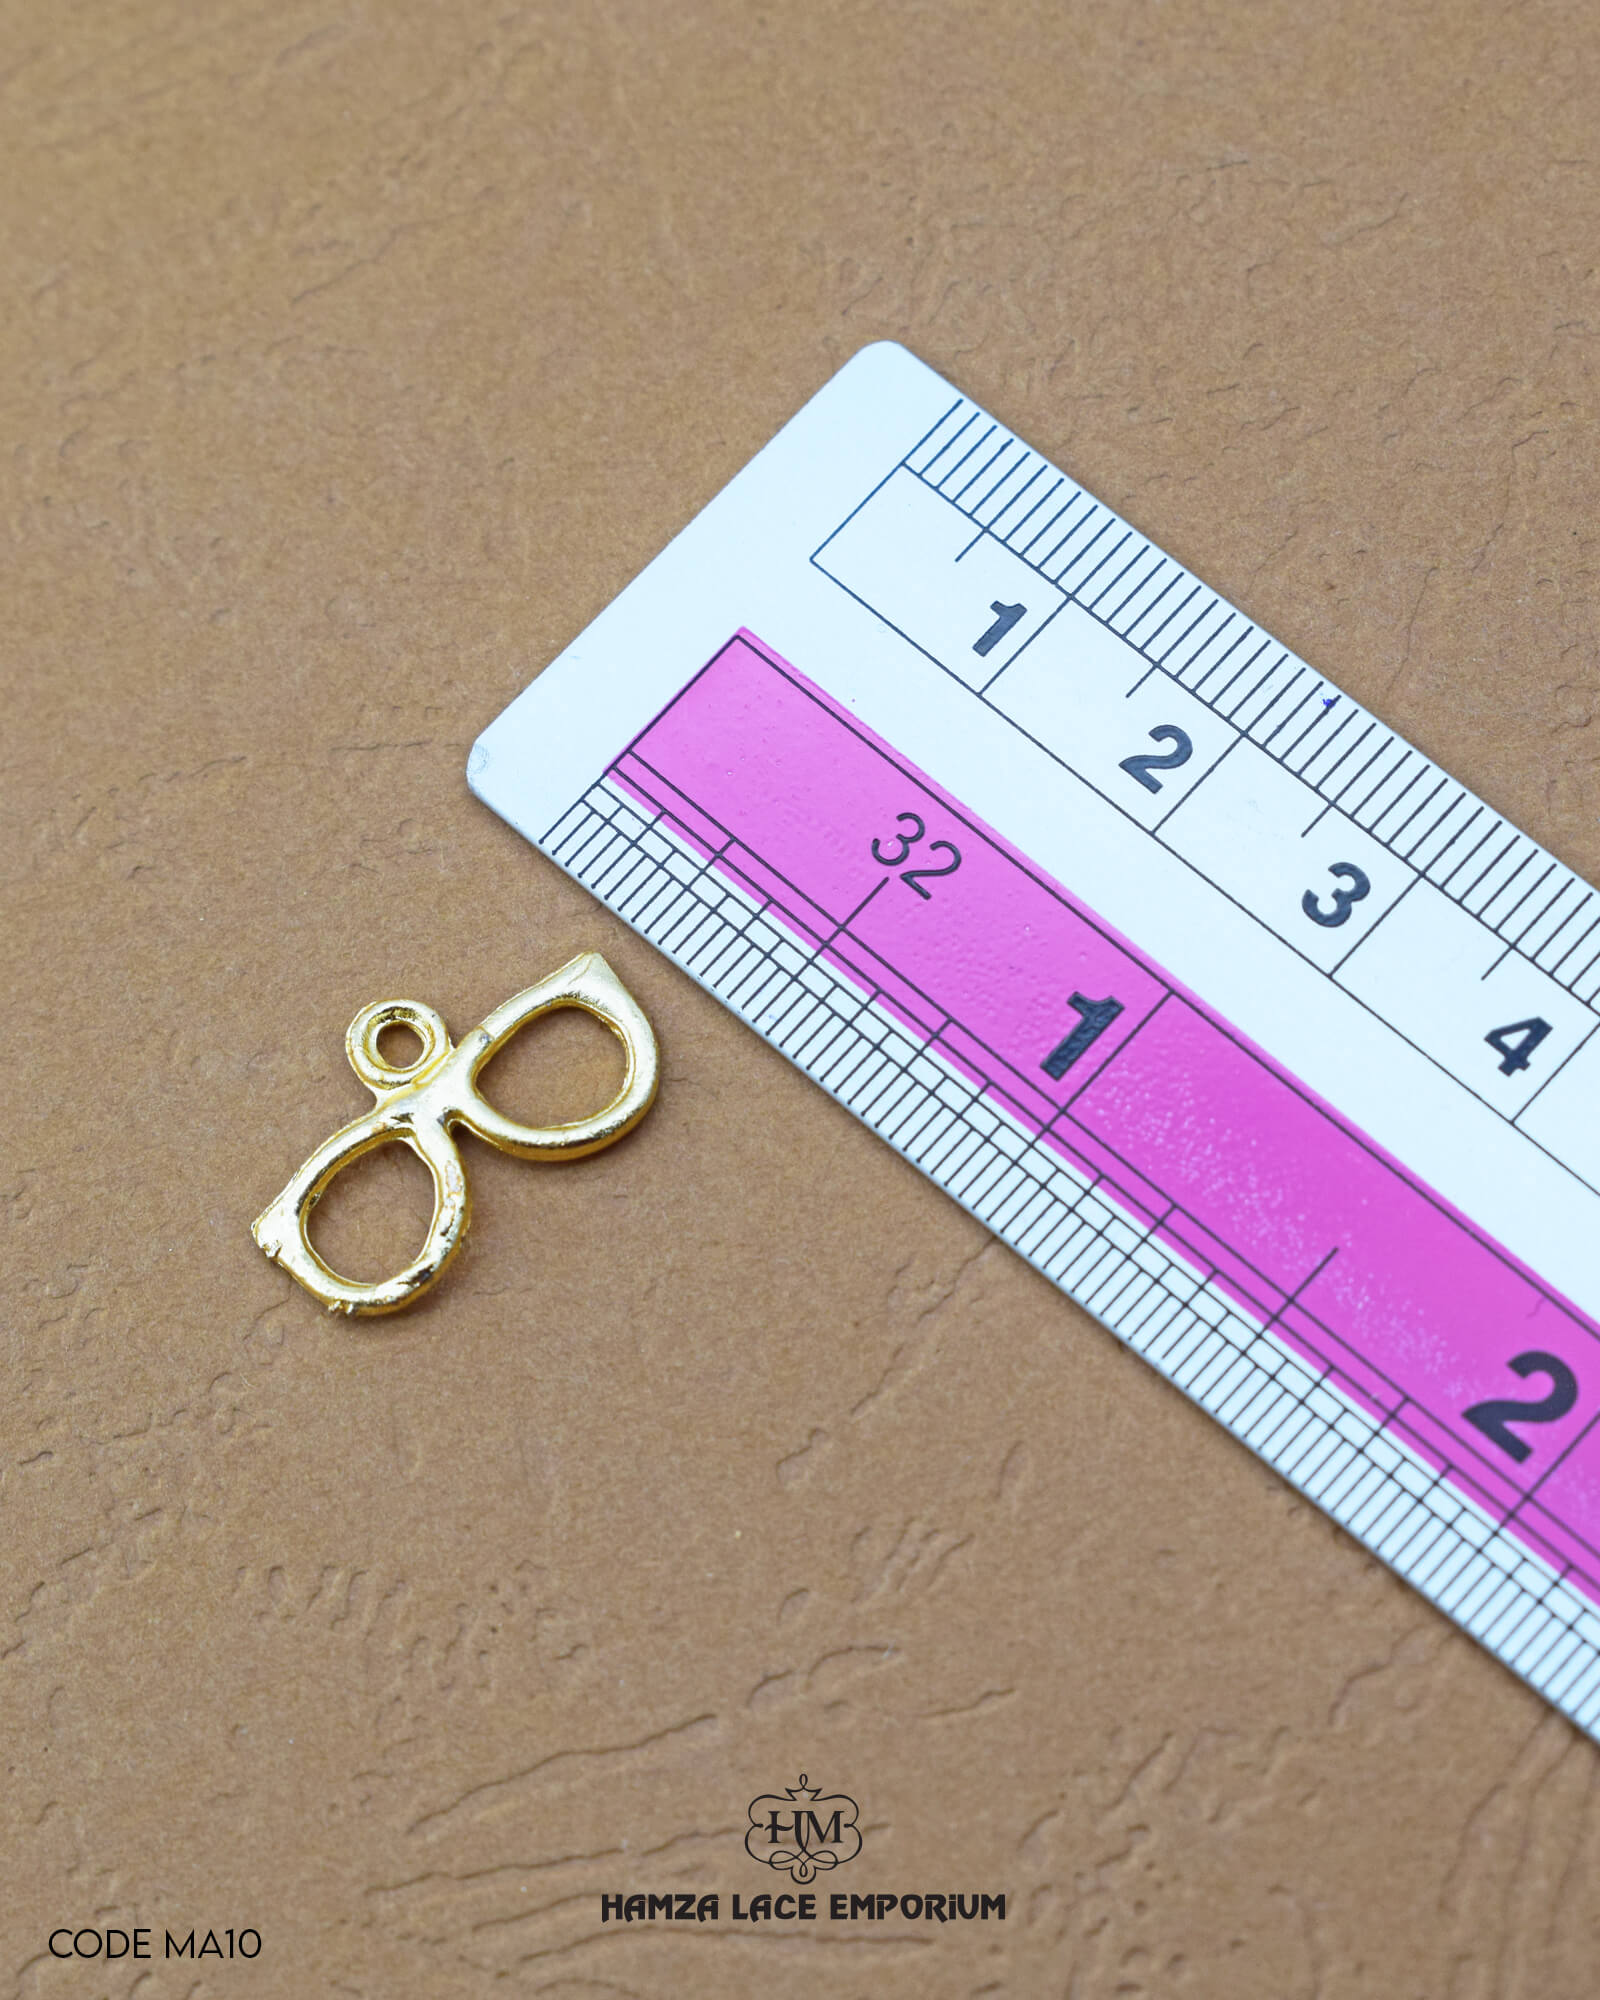 Elegant 'Metal Button MA10' for Clothing (Size shown with ruler)